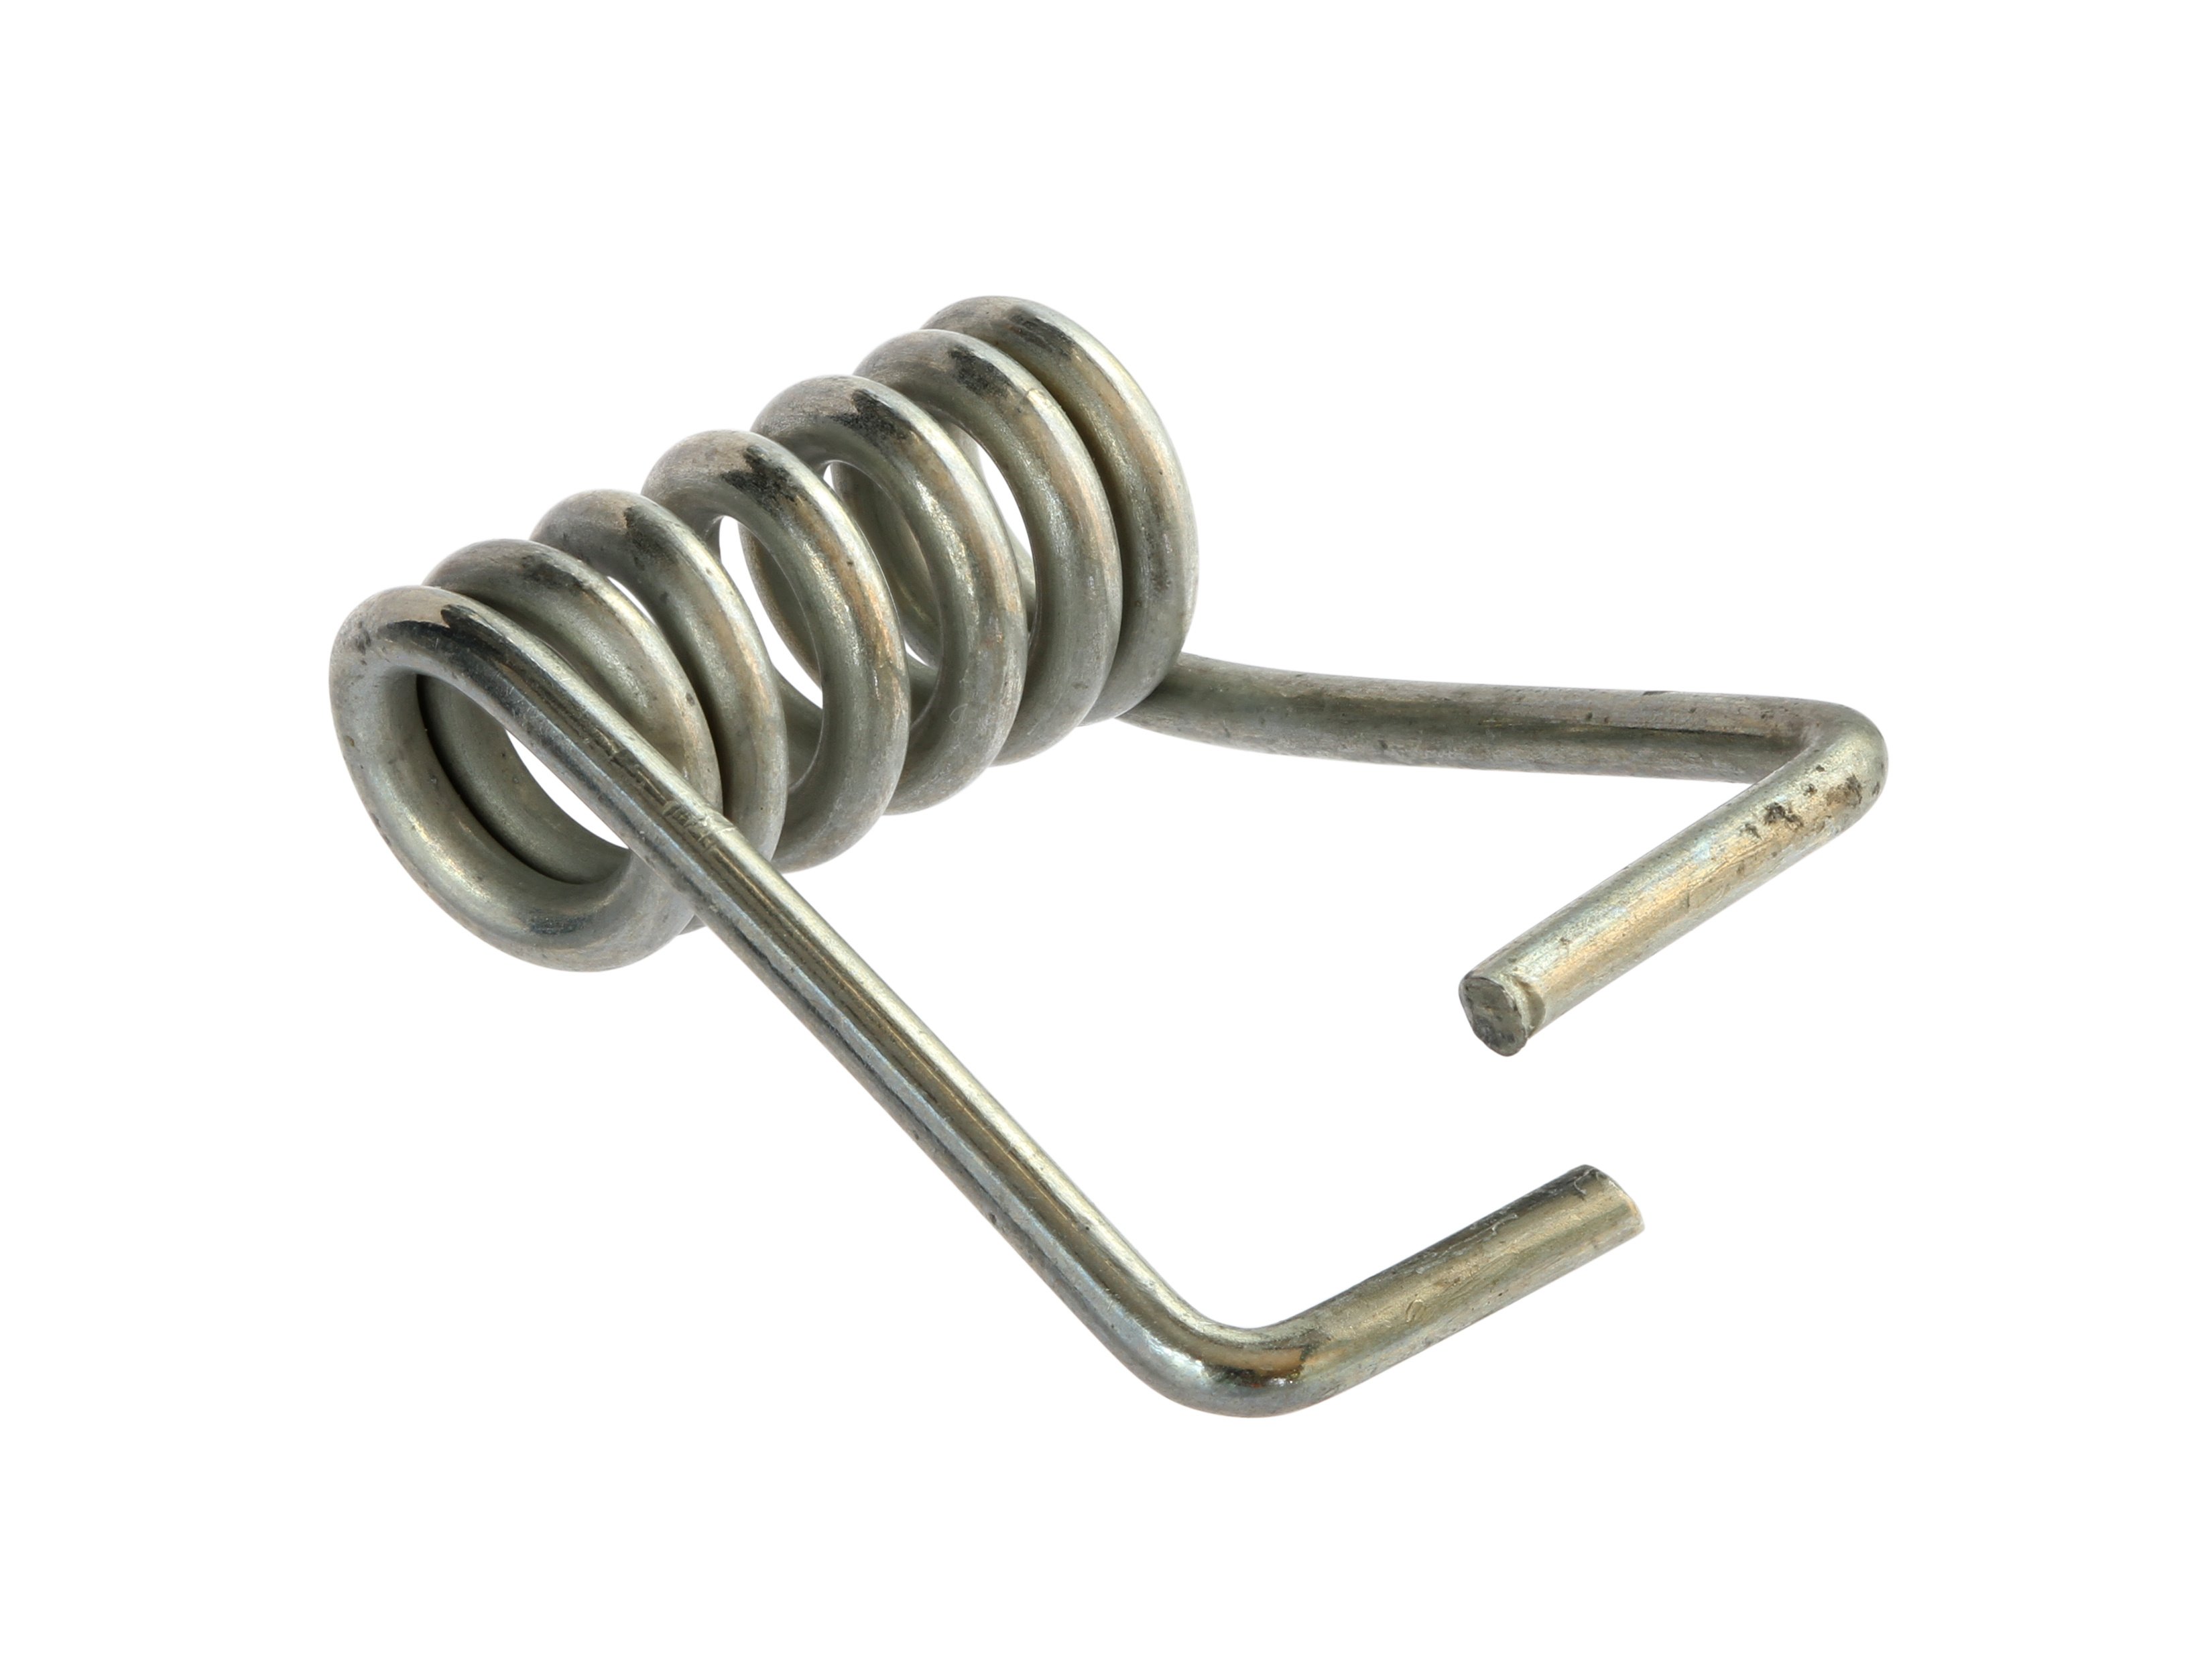 Figure 1: Torsion spring advantages will only be felt if engineers correctly specify a torsion spring for a particular application. Source: Winai Tepsuttinun/Adobe Stock